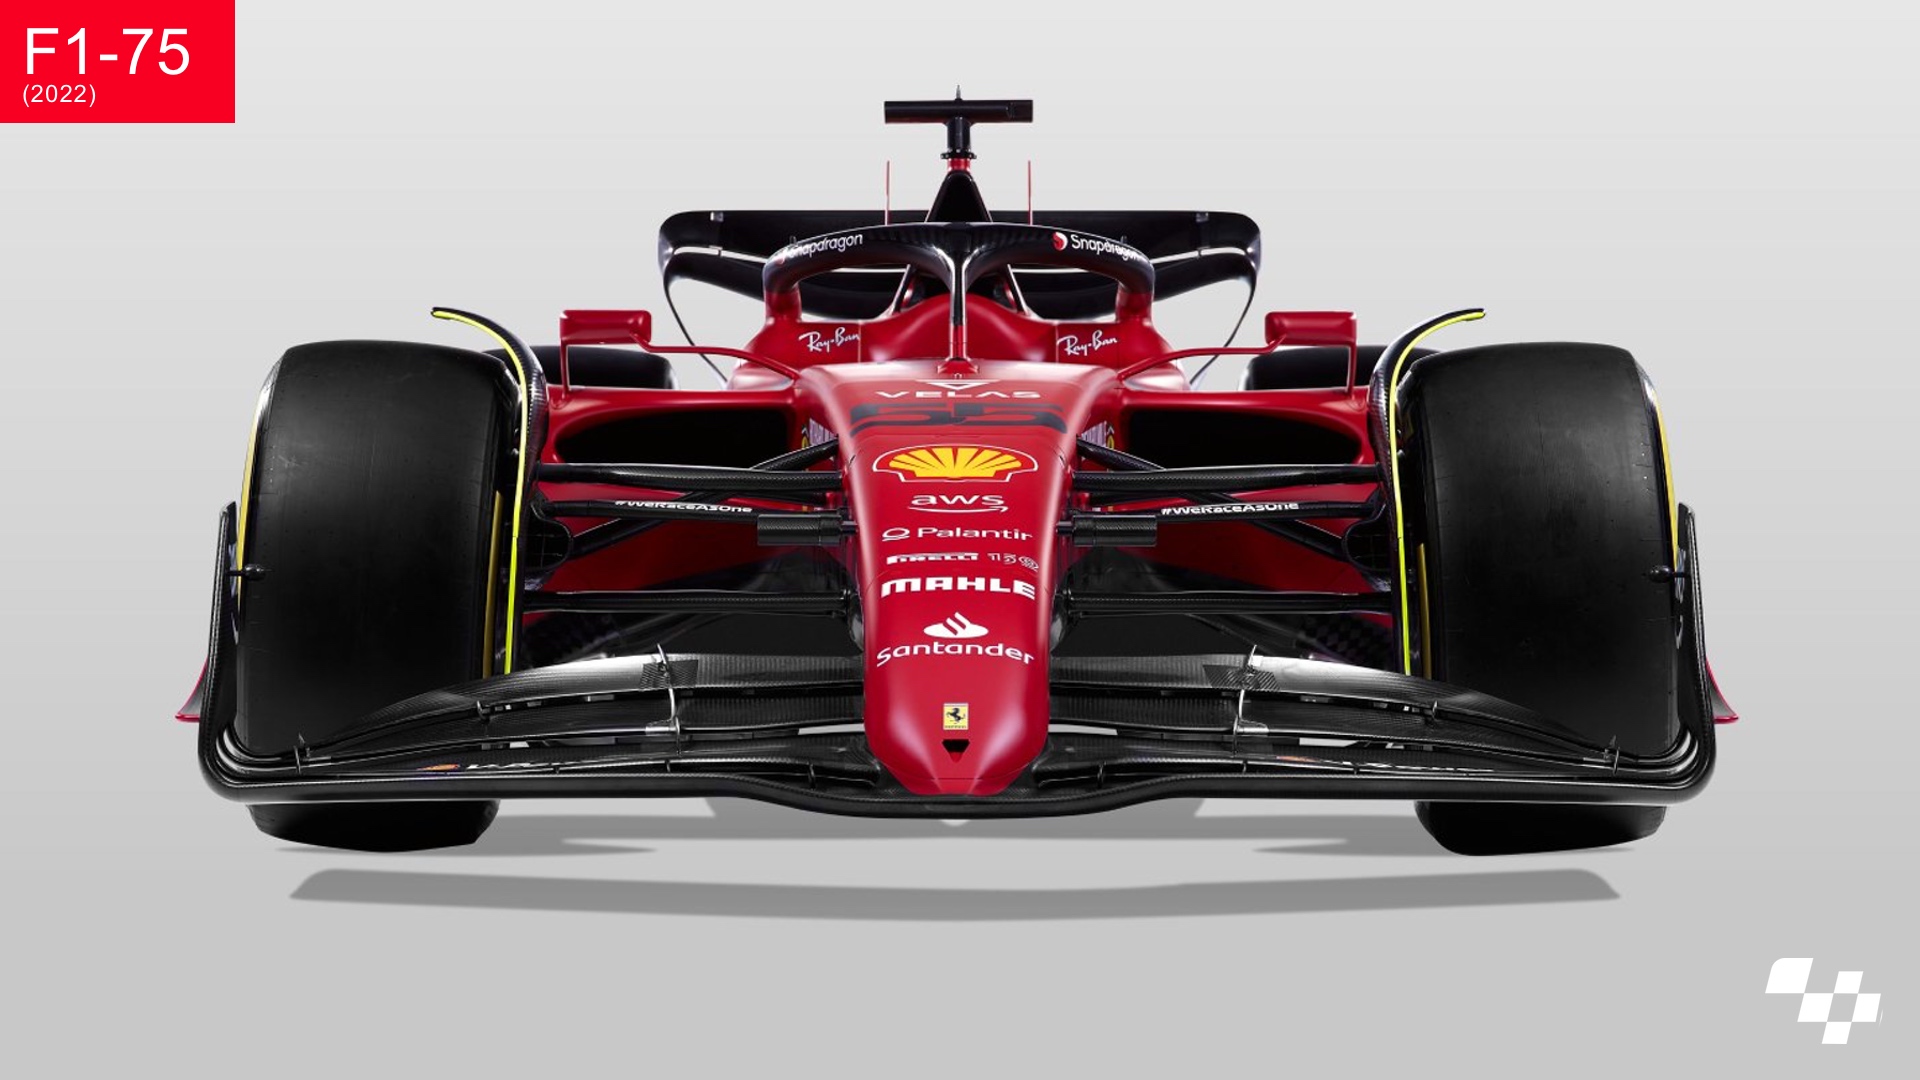 Make your device stand out with this unique Ferrari F1 75 wallpaper 1920x1080